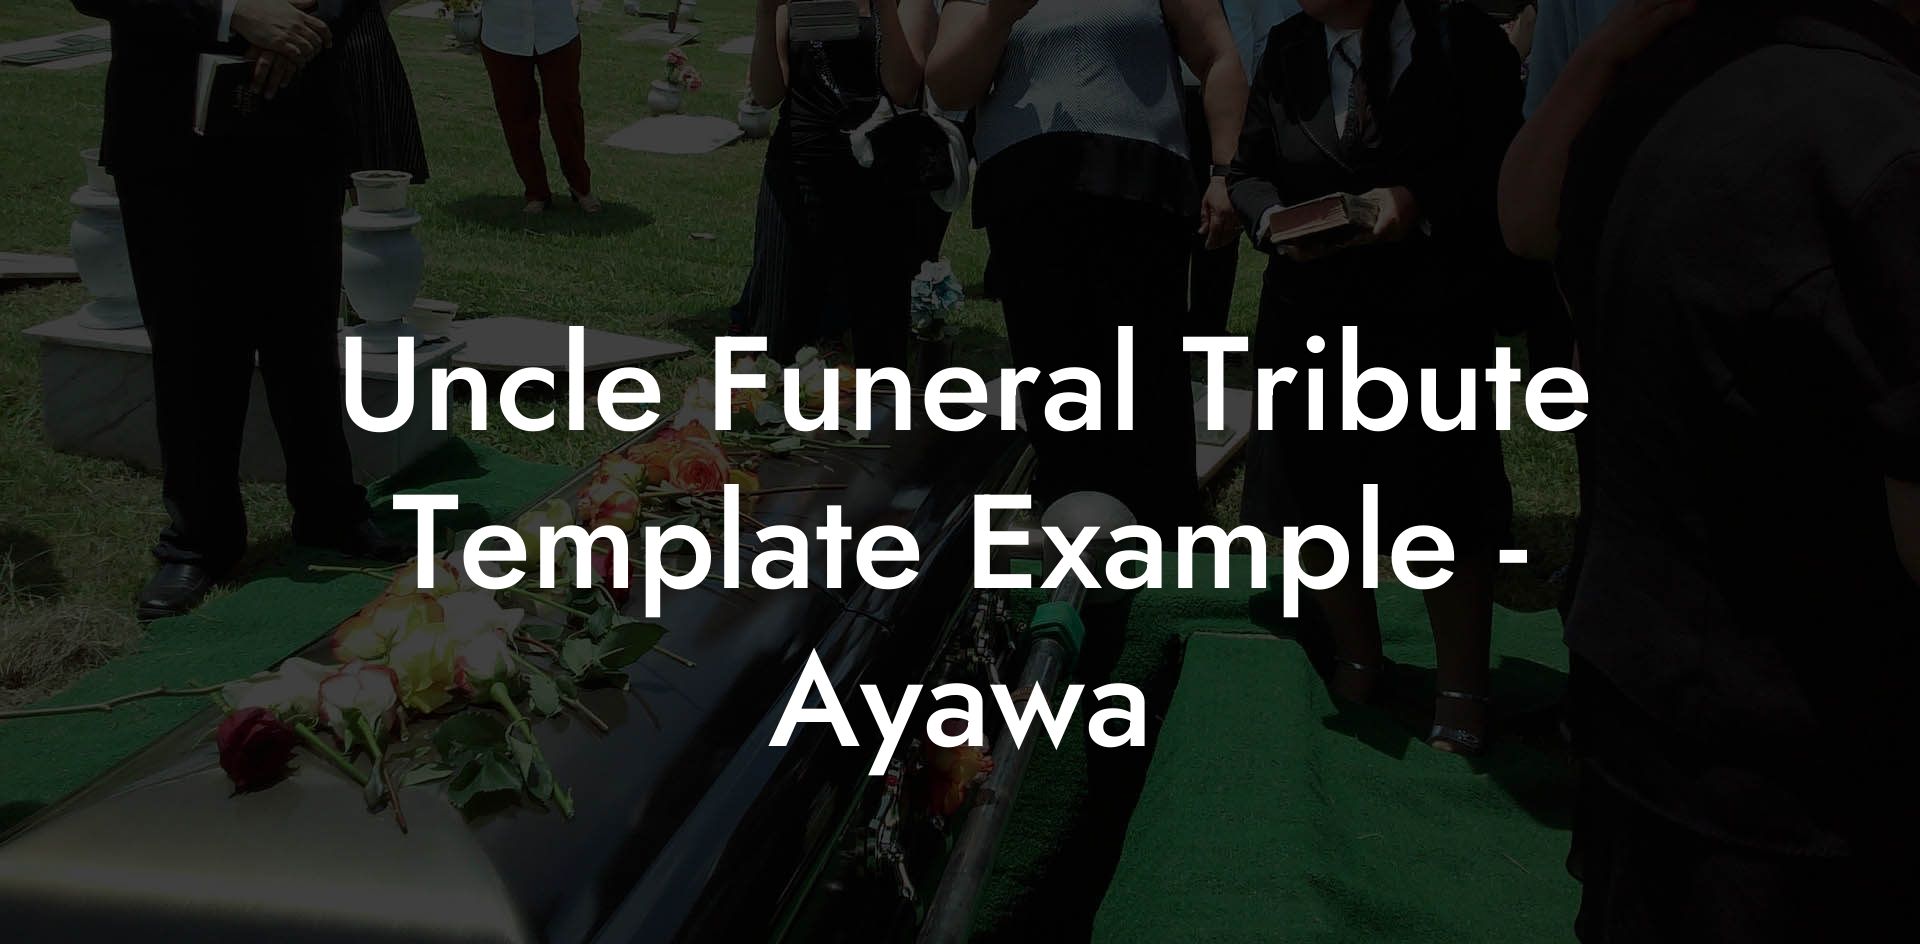 Uncle Funeral Tribute Template Example - Ayawa